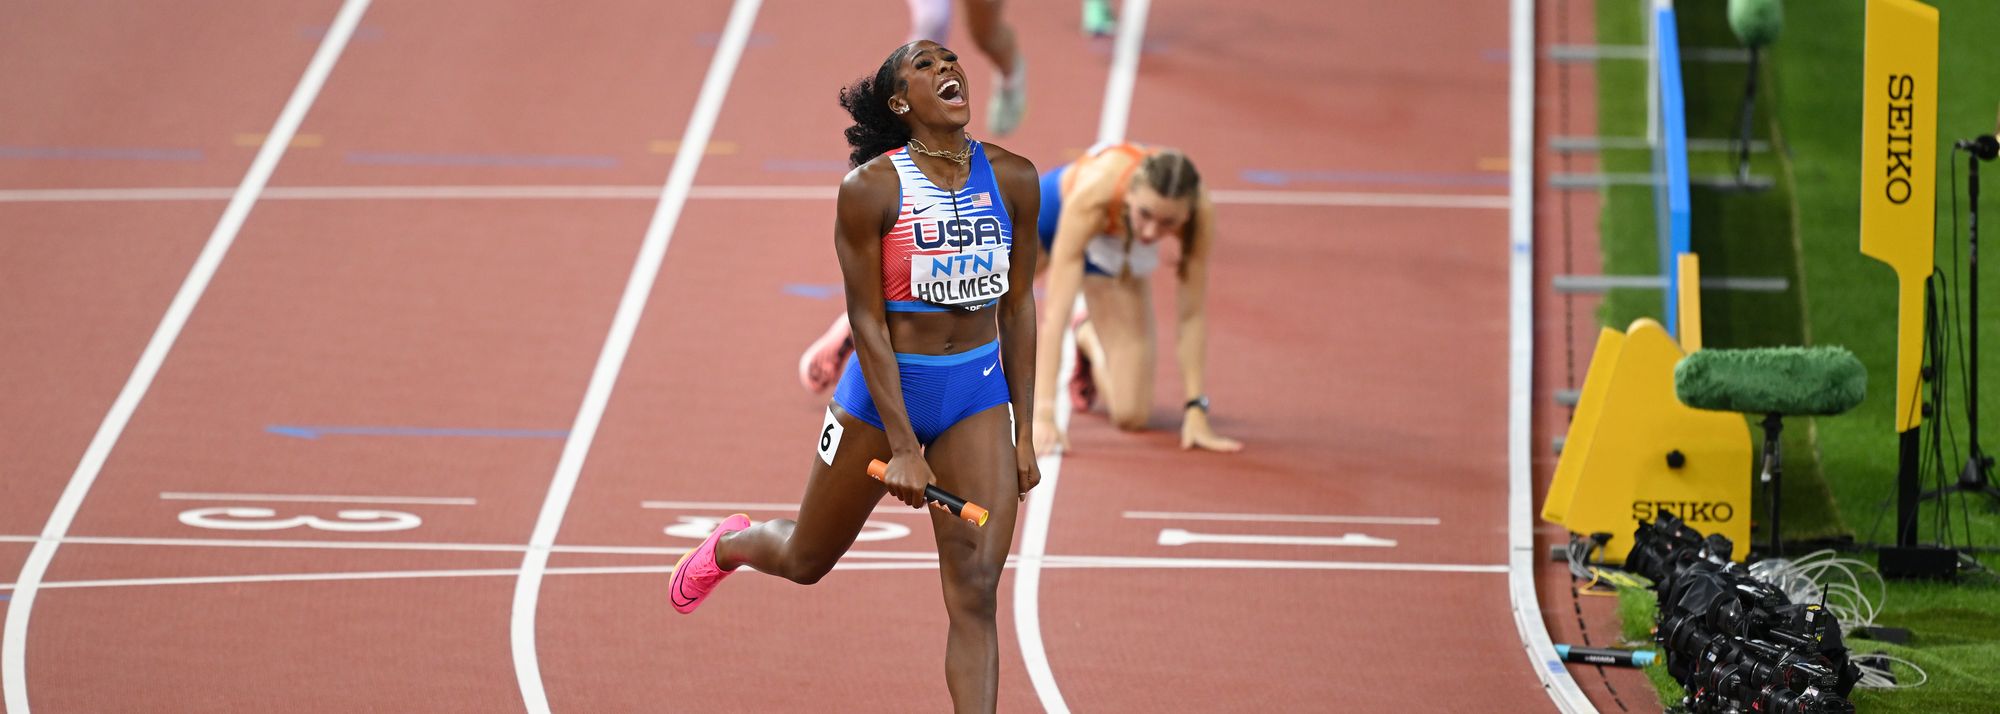 USA's 3:08.80 clocking from the mixed 4x400m at the World Athletics Championships Budapest 23 is now officially in the record books